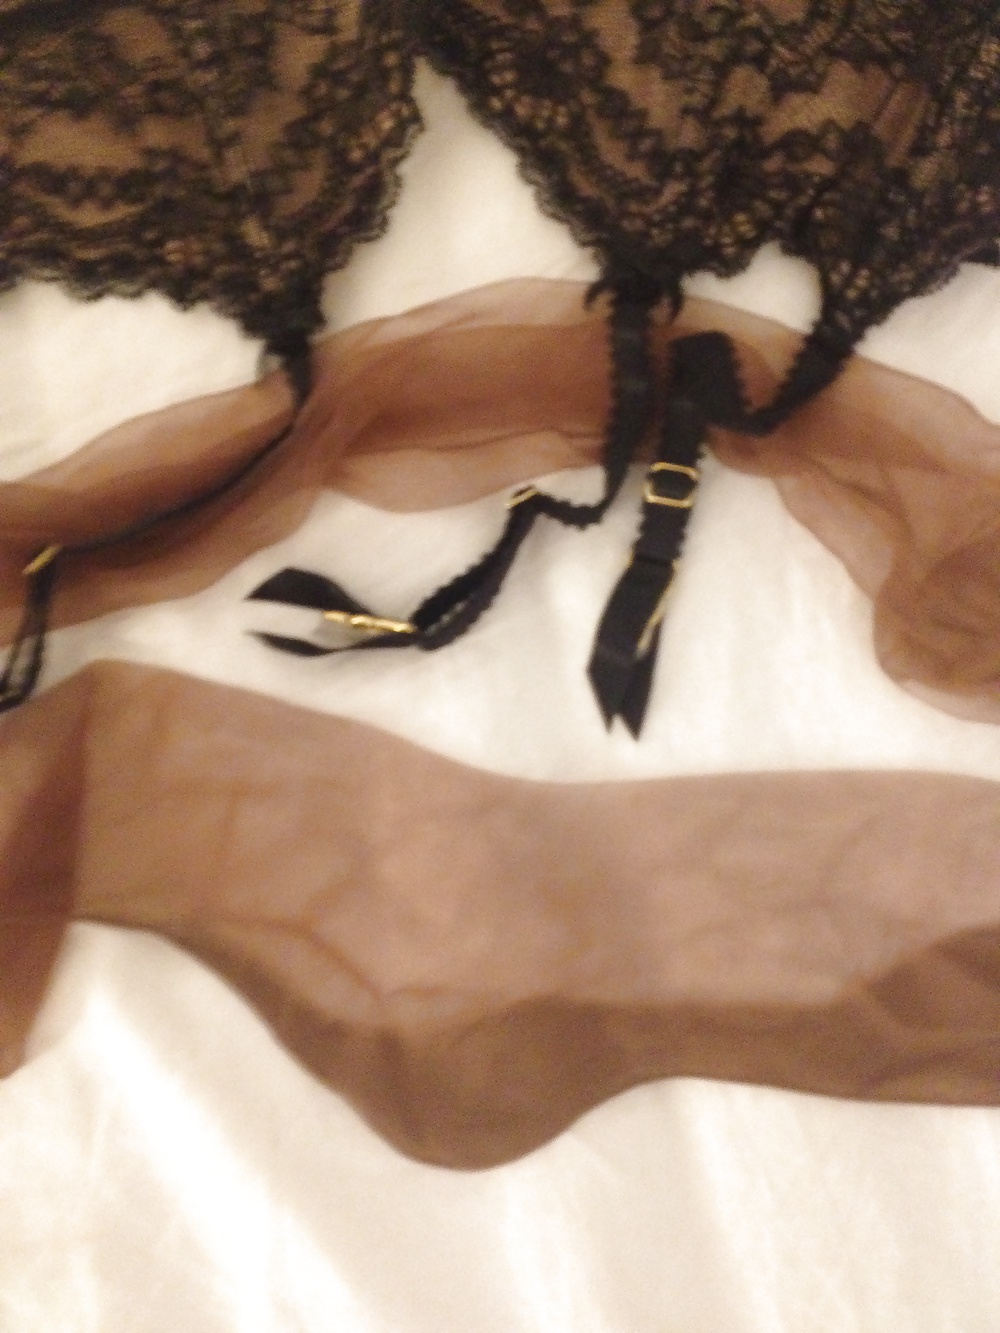 My wife's vintage ff stockings and suspenders #30480556